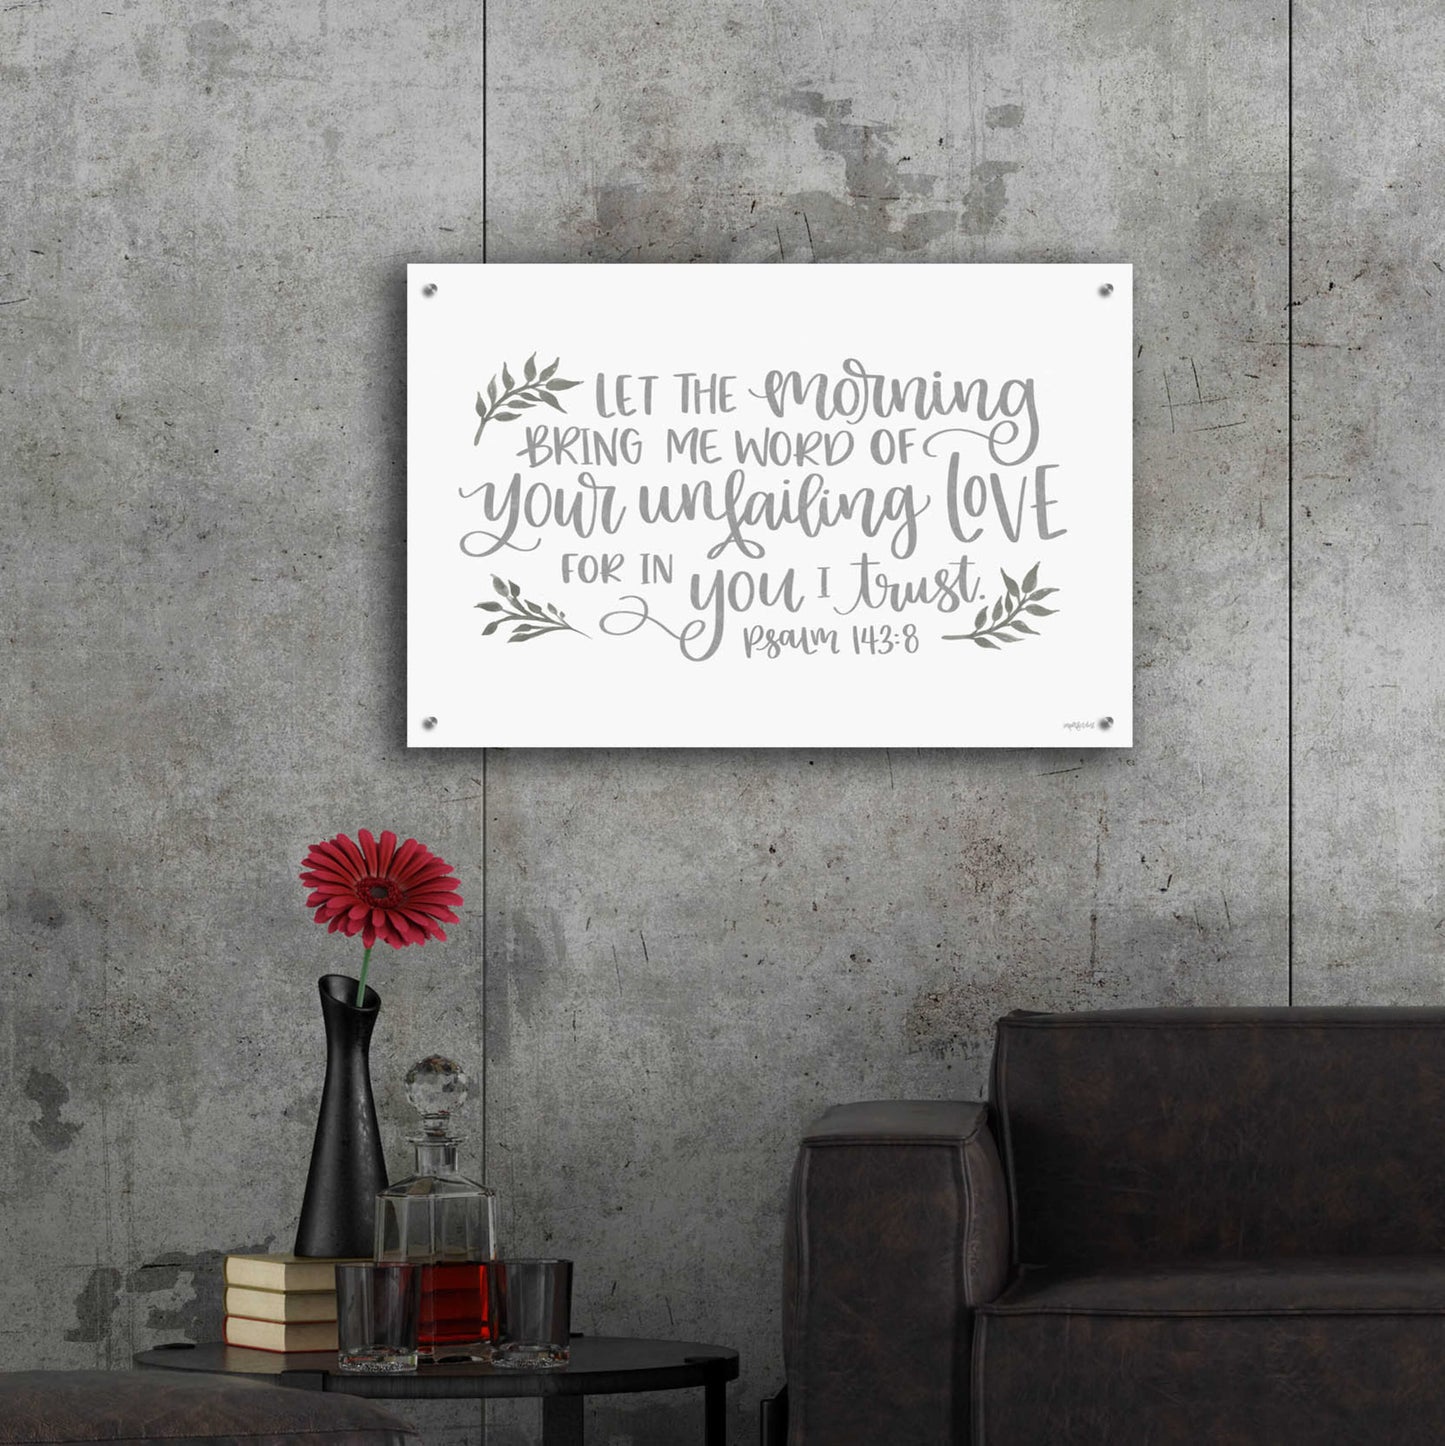 Epic Art 'Your Unfailing Love' by Imperfect Dust, Acrylic Glass Wall Art,36x24